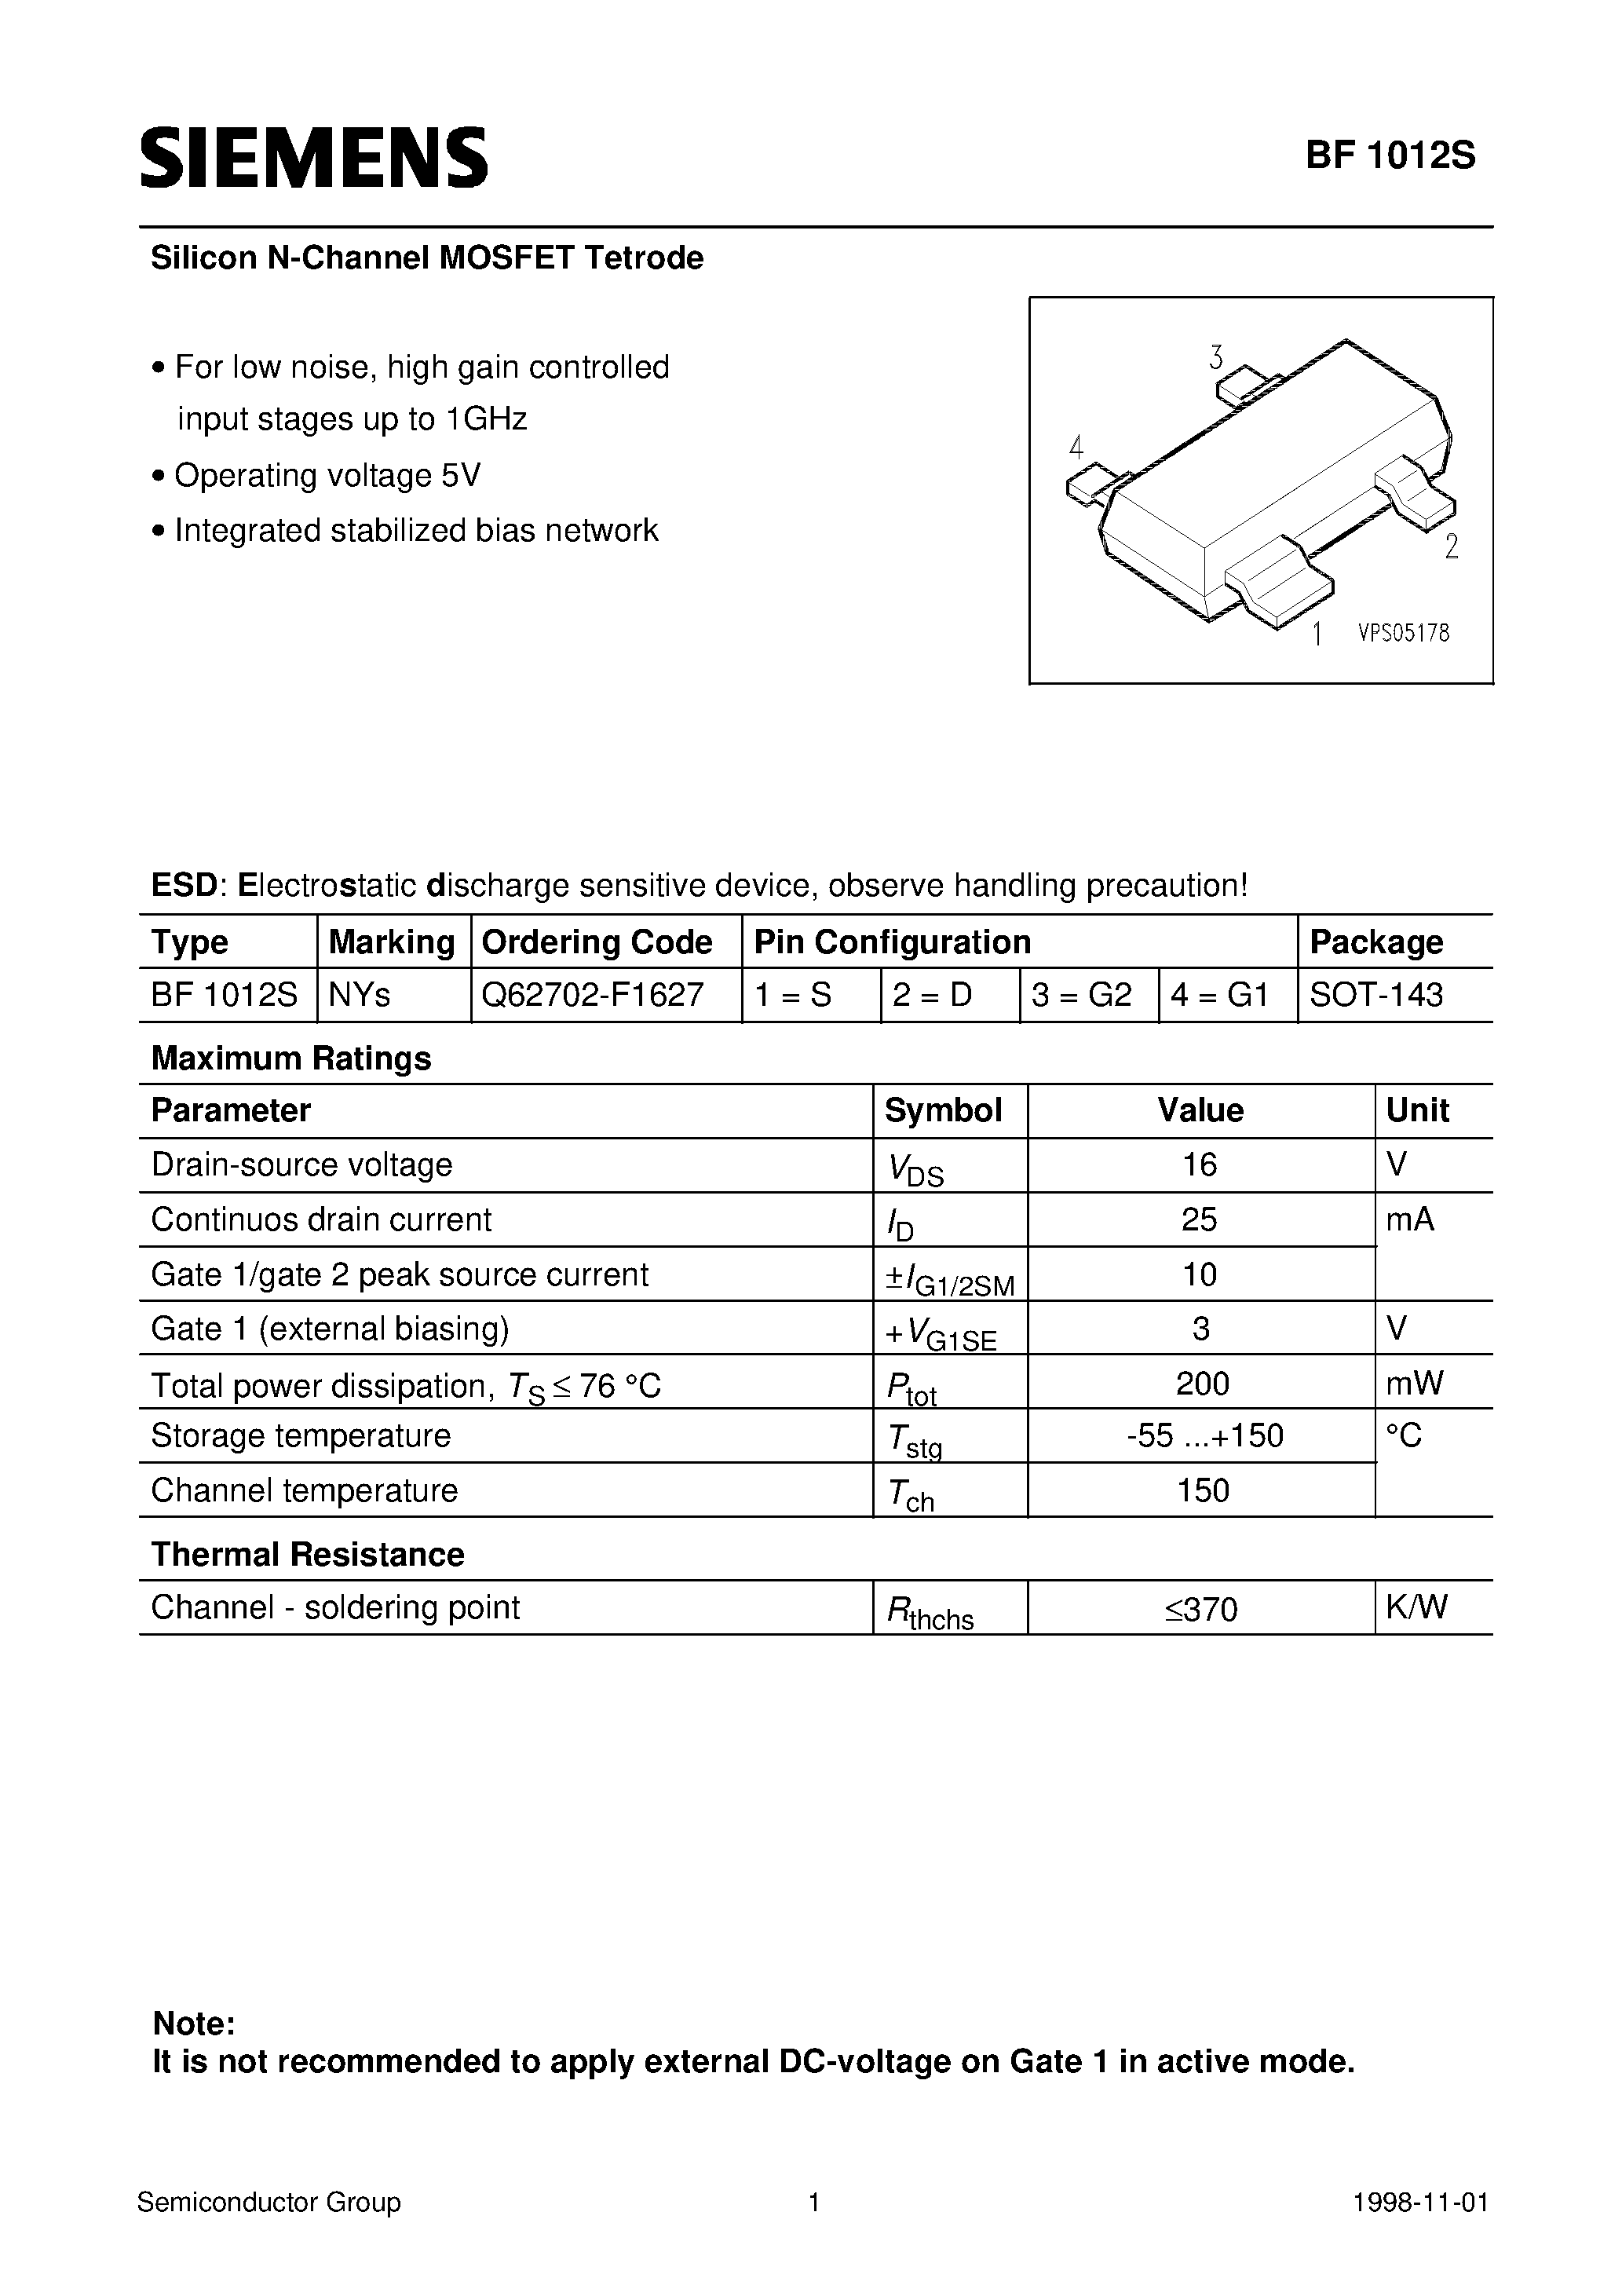 Даташит BF1012S - Silicon N-Channel MOSFET Tetrode (For low noise/ high gain controlled input stages up to 1GHz Operating voltage 5V Integrated stabilized bias network) страница 1